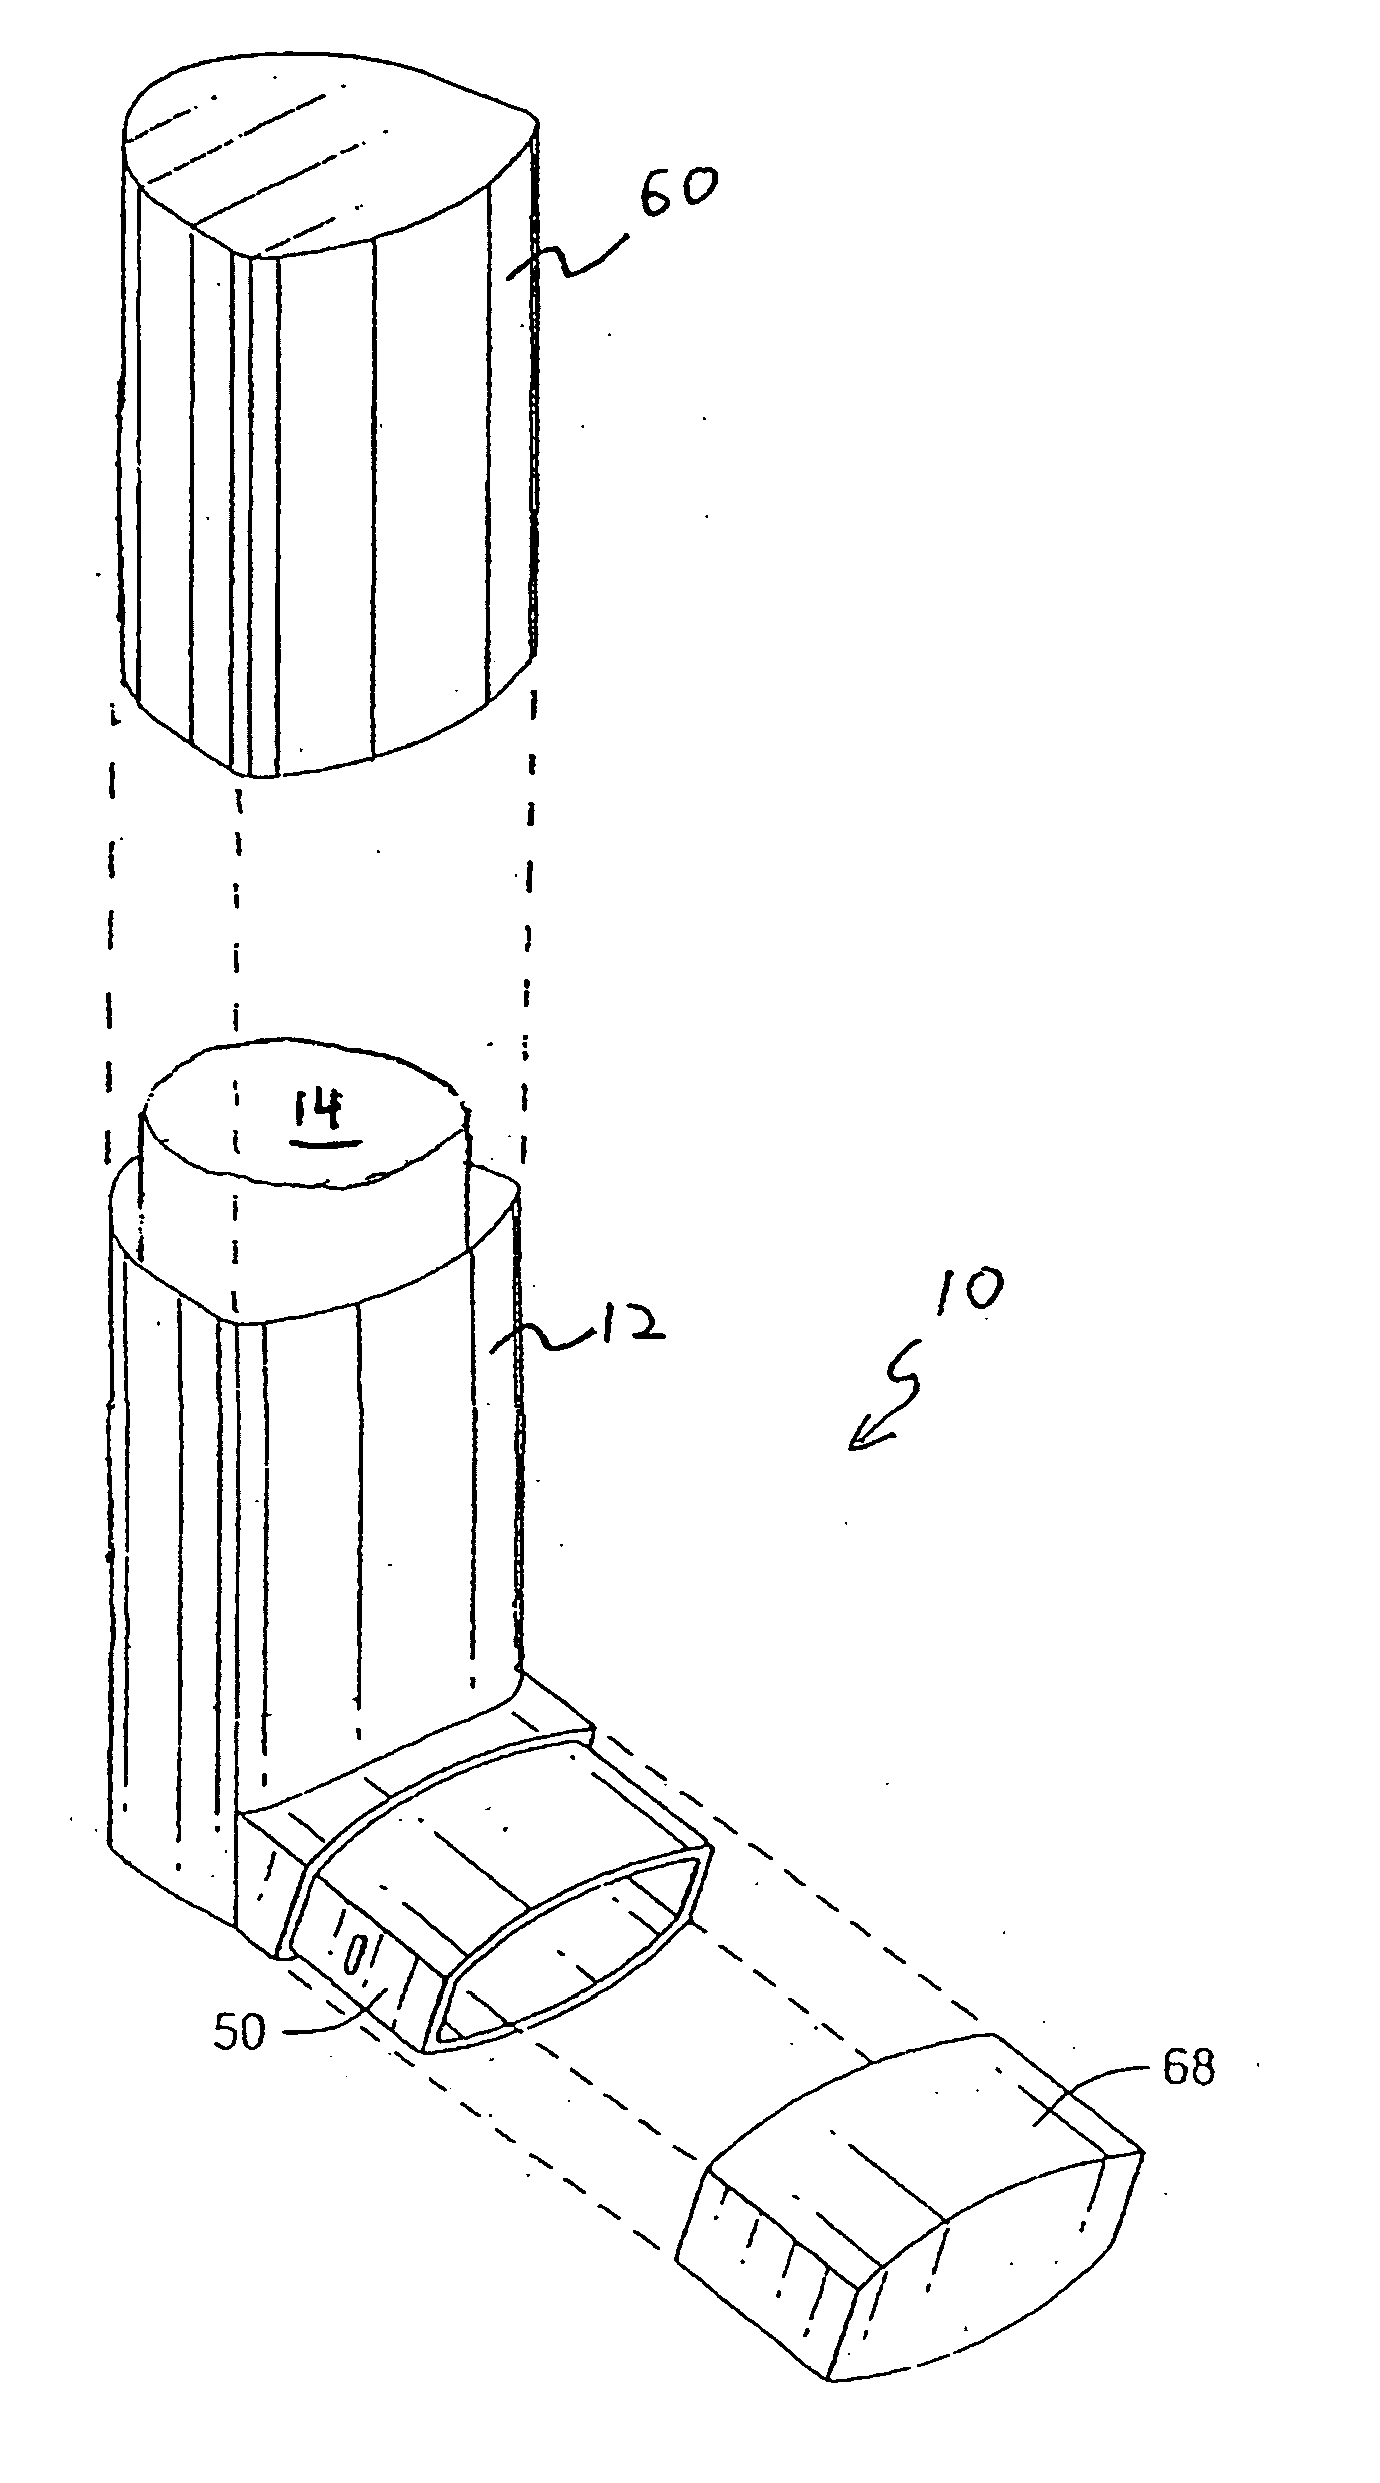 Cleaning compound for and method of cleaning valves and actuators of metered dose dispensers containing pharmaceutical compositions